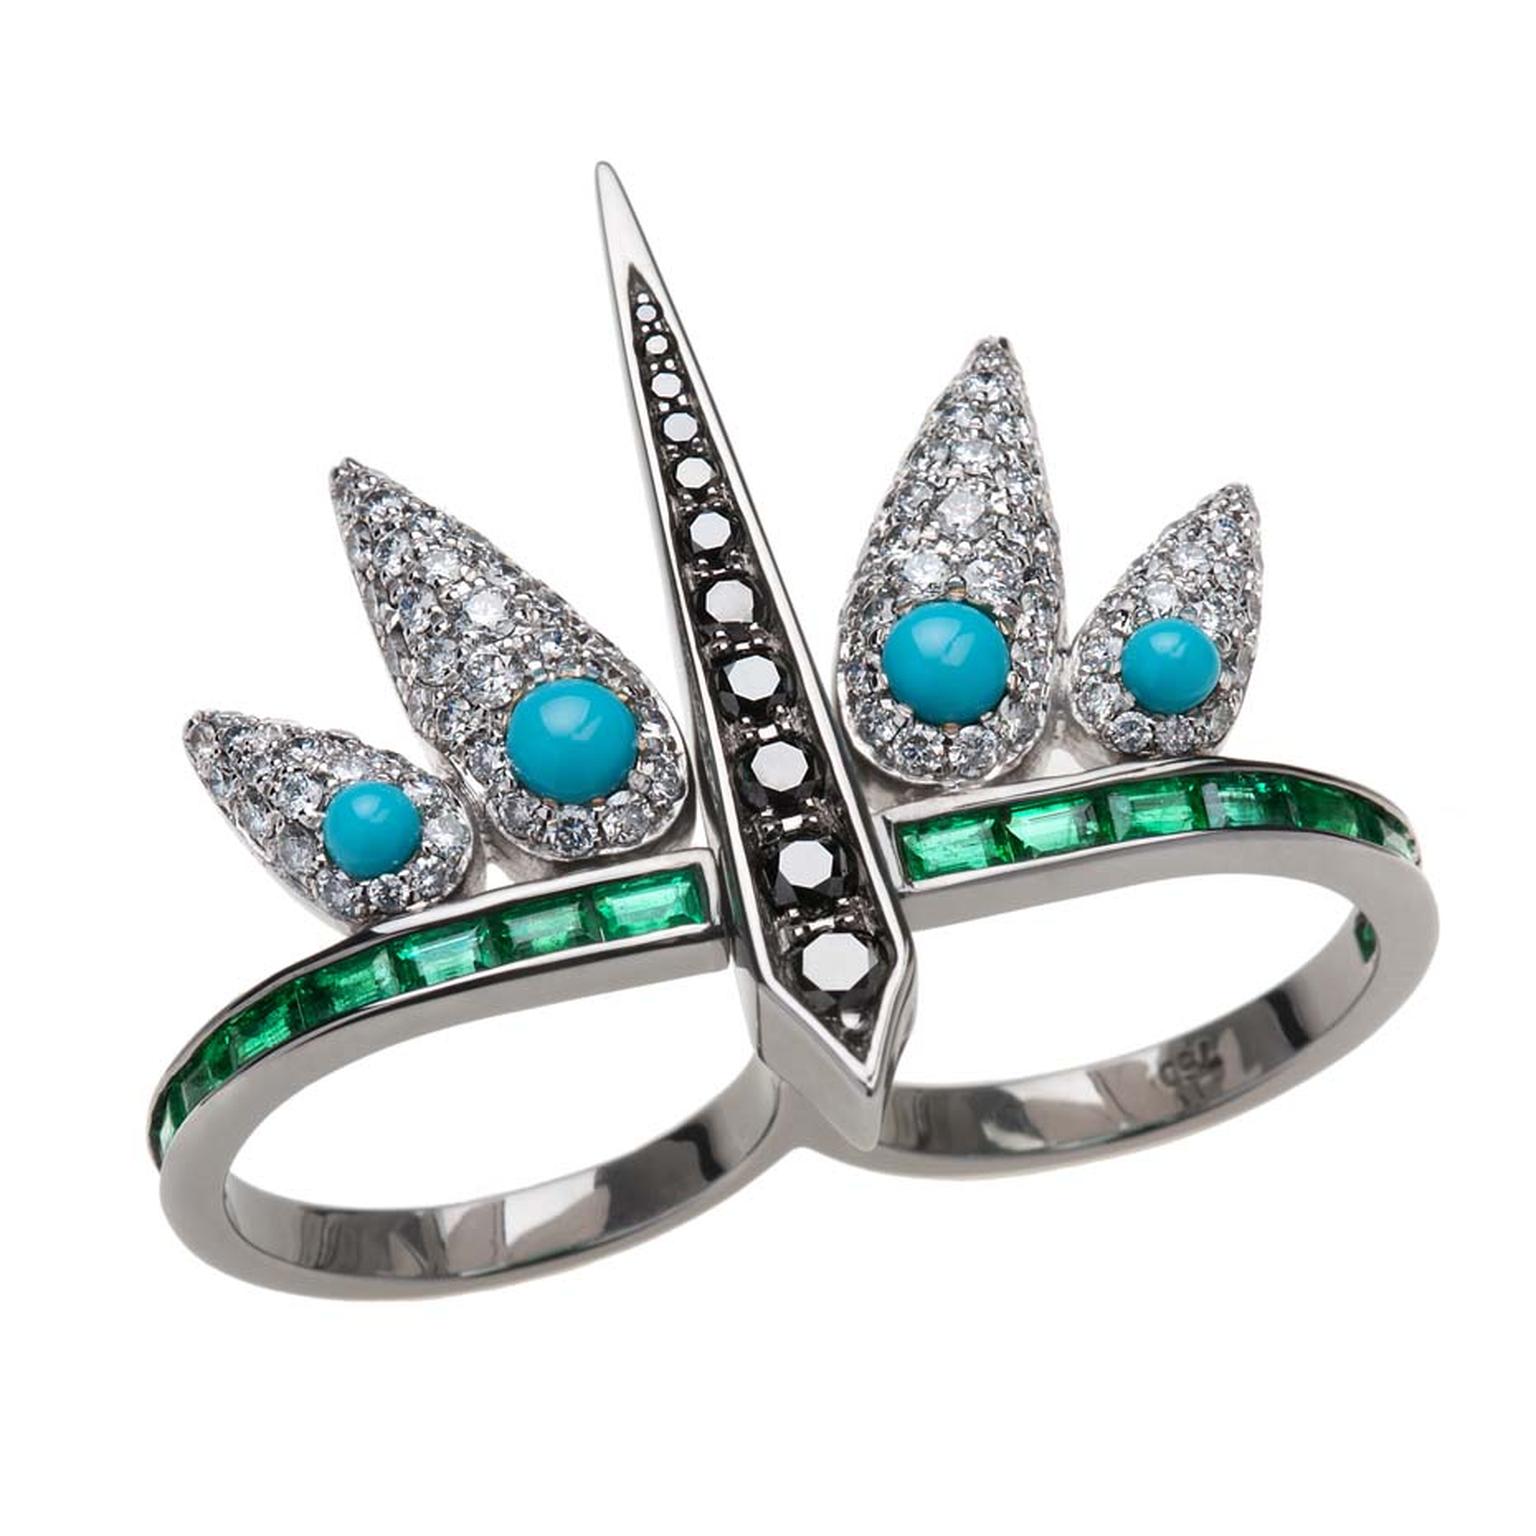 Nikos Koulis Spectrum collection ring with white and black diamonds, turquoises and baguette-cut emeralds